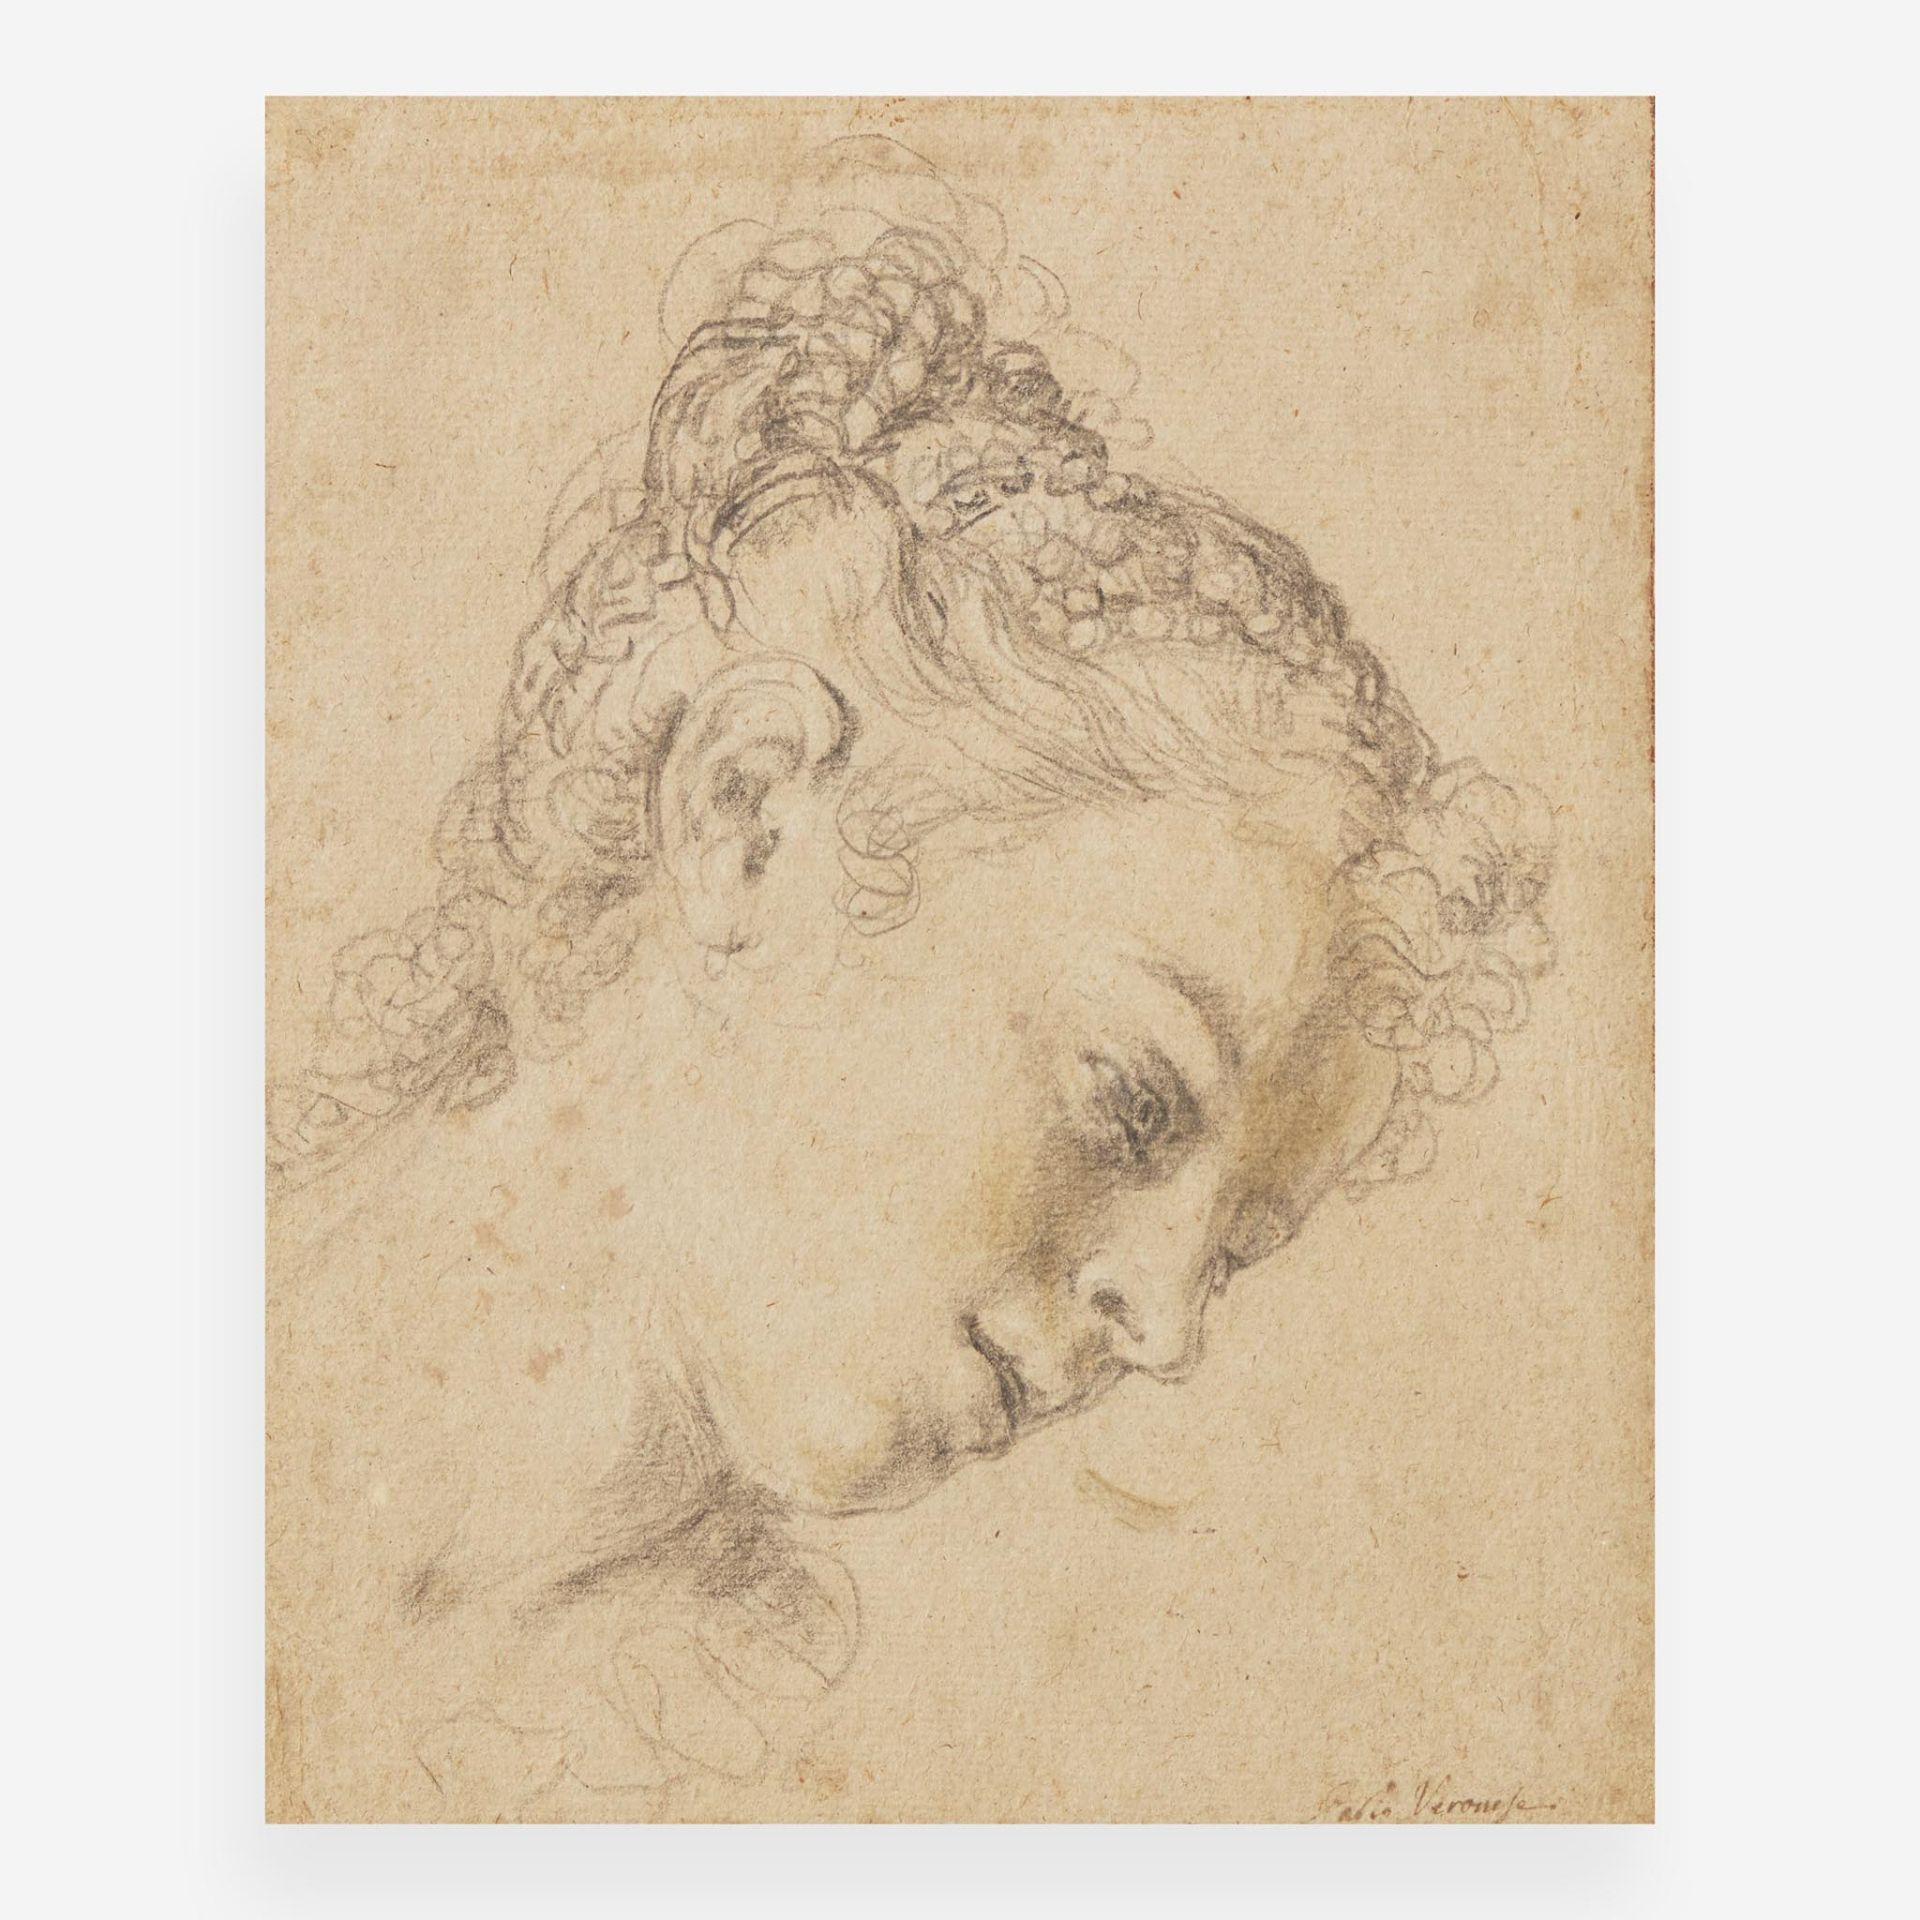 Studio of Paolo Veronese (Italian, 1528-1588) Head of a Woman, Looking Up